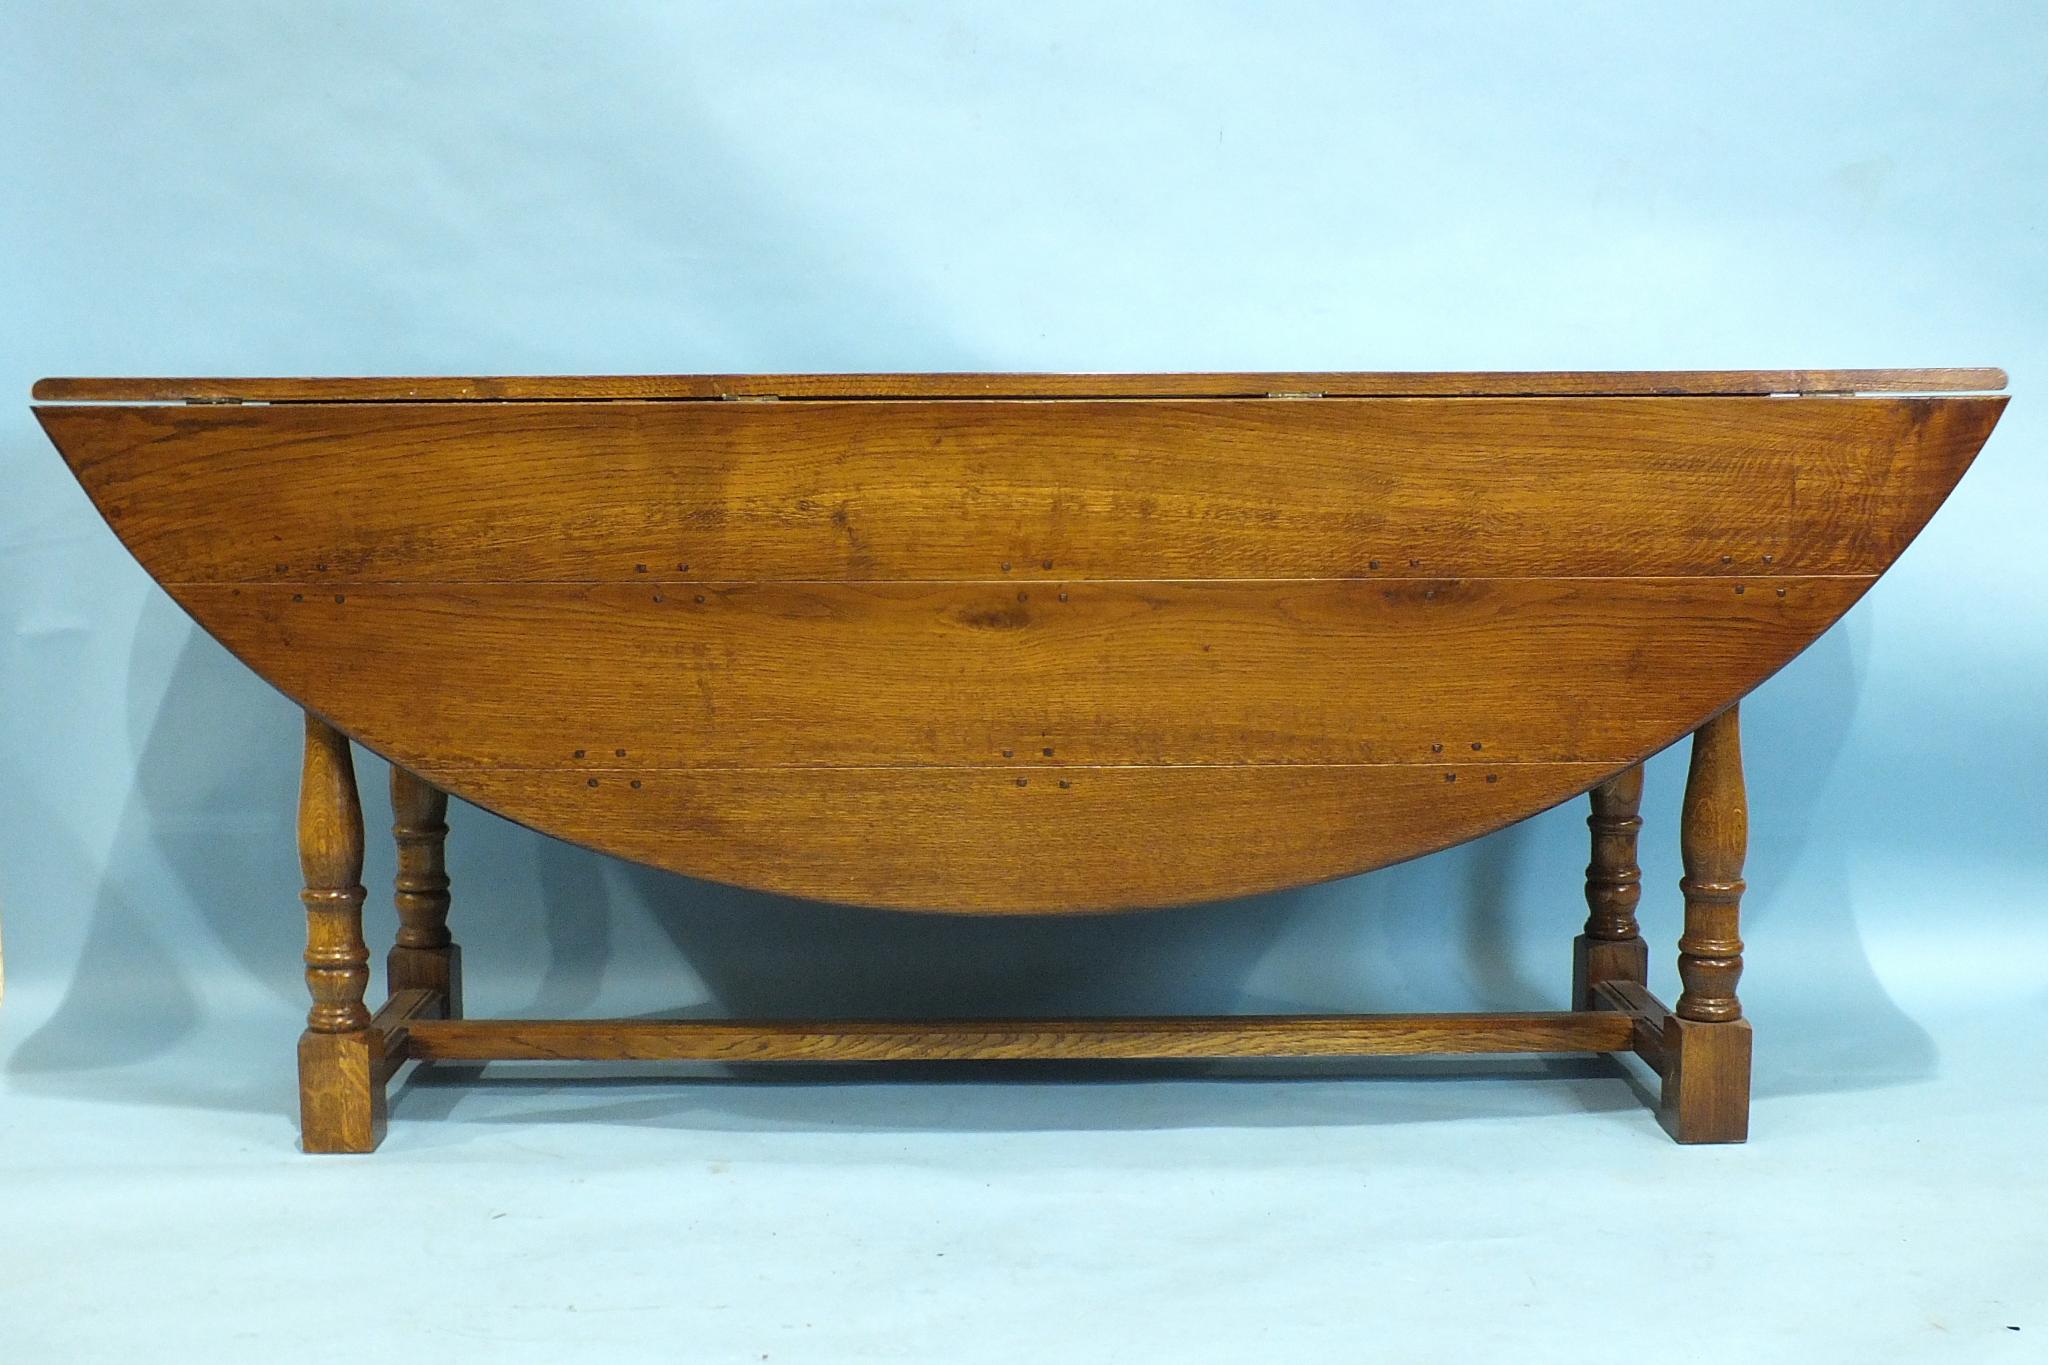 A reproduction elm wake table by Brights of Nettlebed, on turned legs joined by centre stretcher,